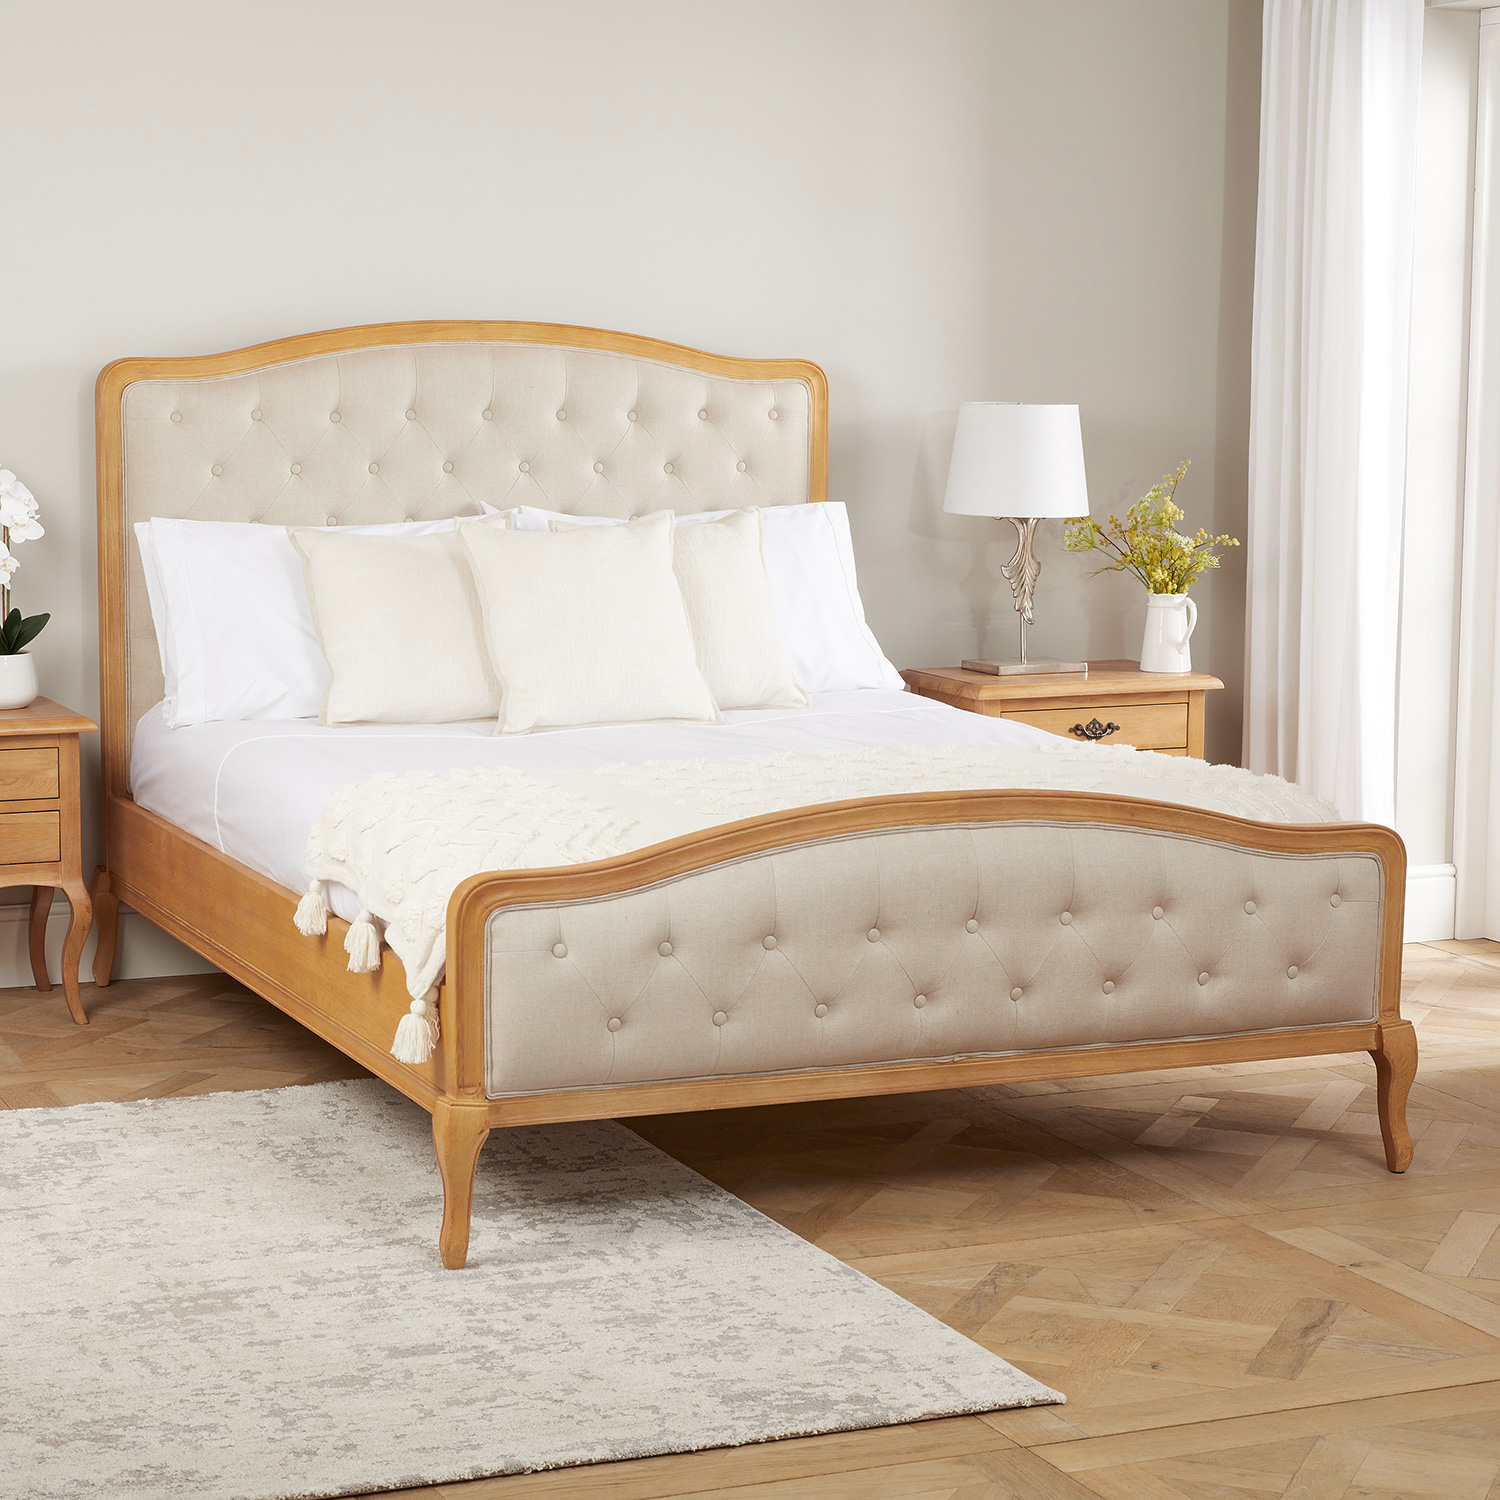 Celeste French Oak Buttoned Upholstered High Foot Board Bed – Double Size